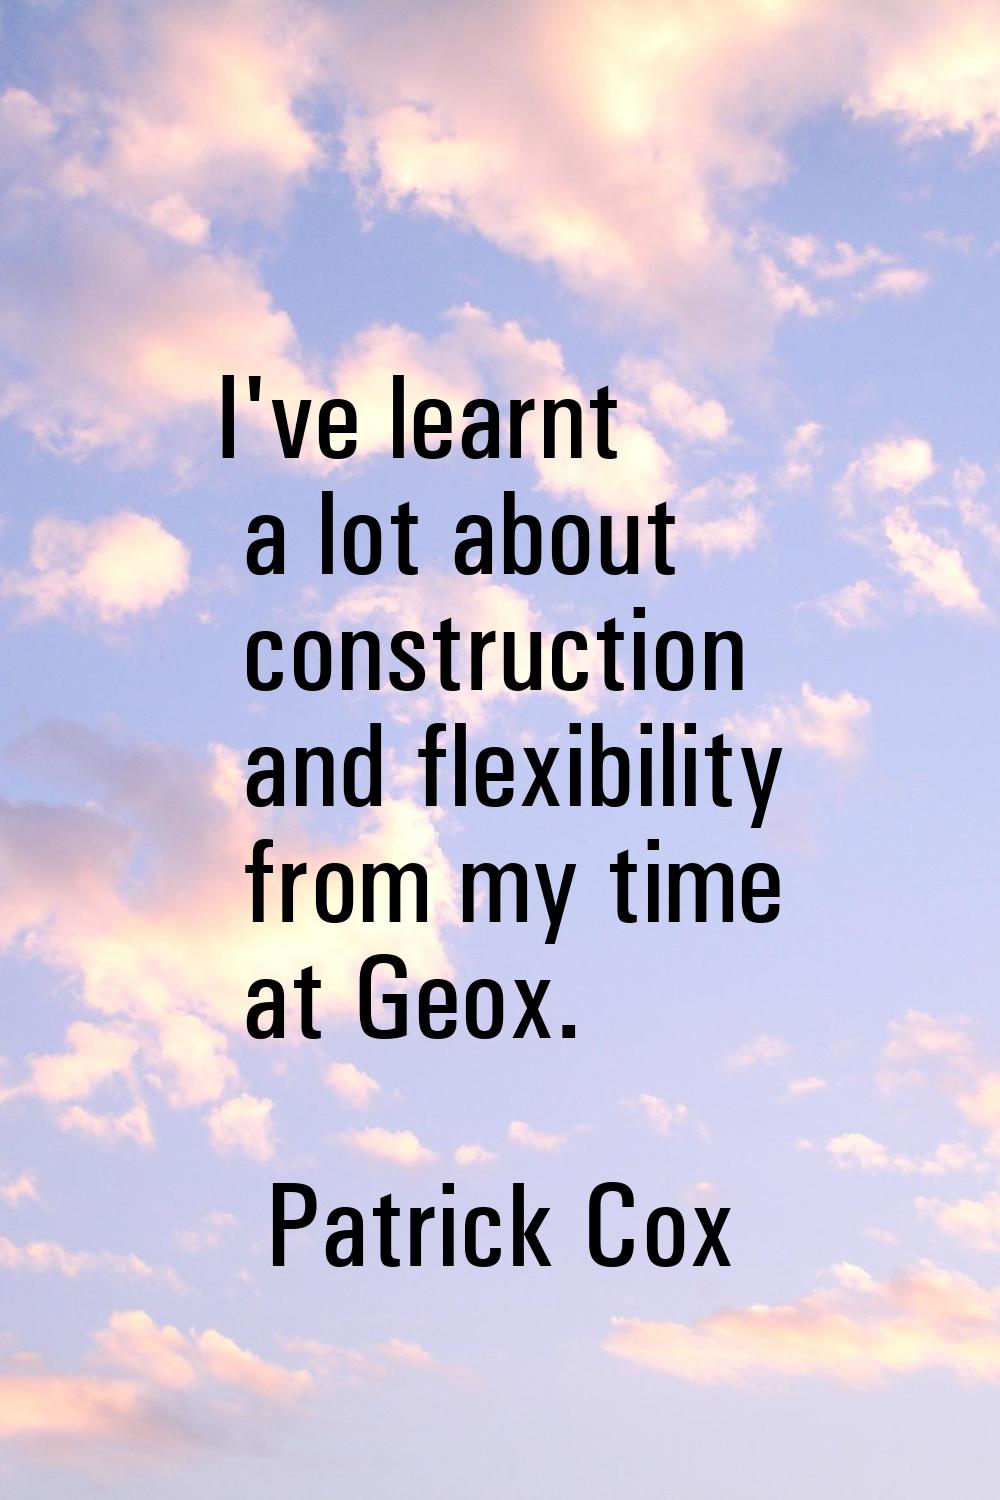 I've learnt a lot about construction and flexibility from my time at Geox.